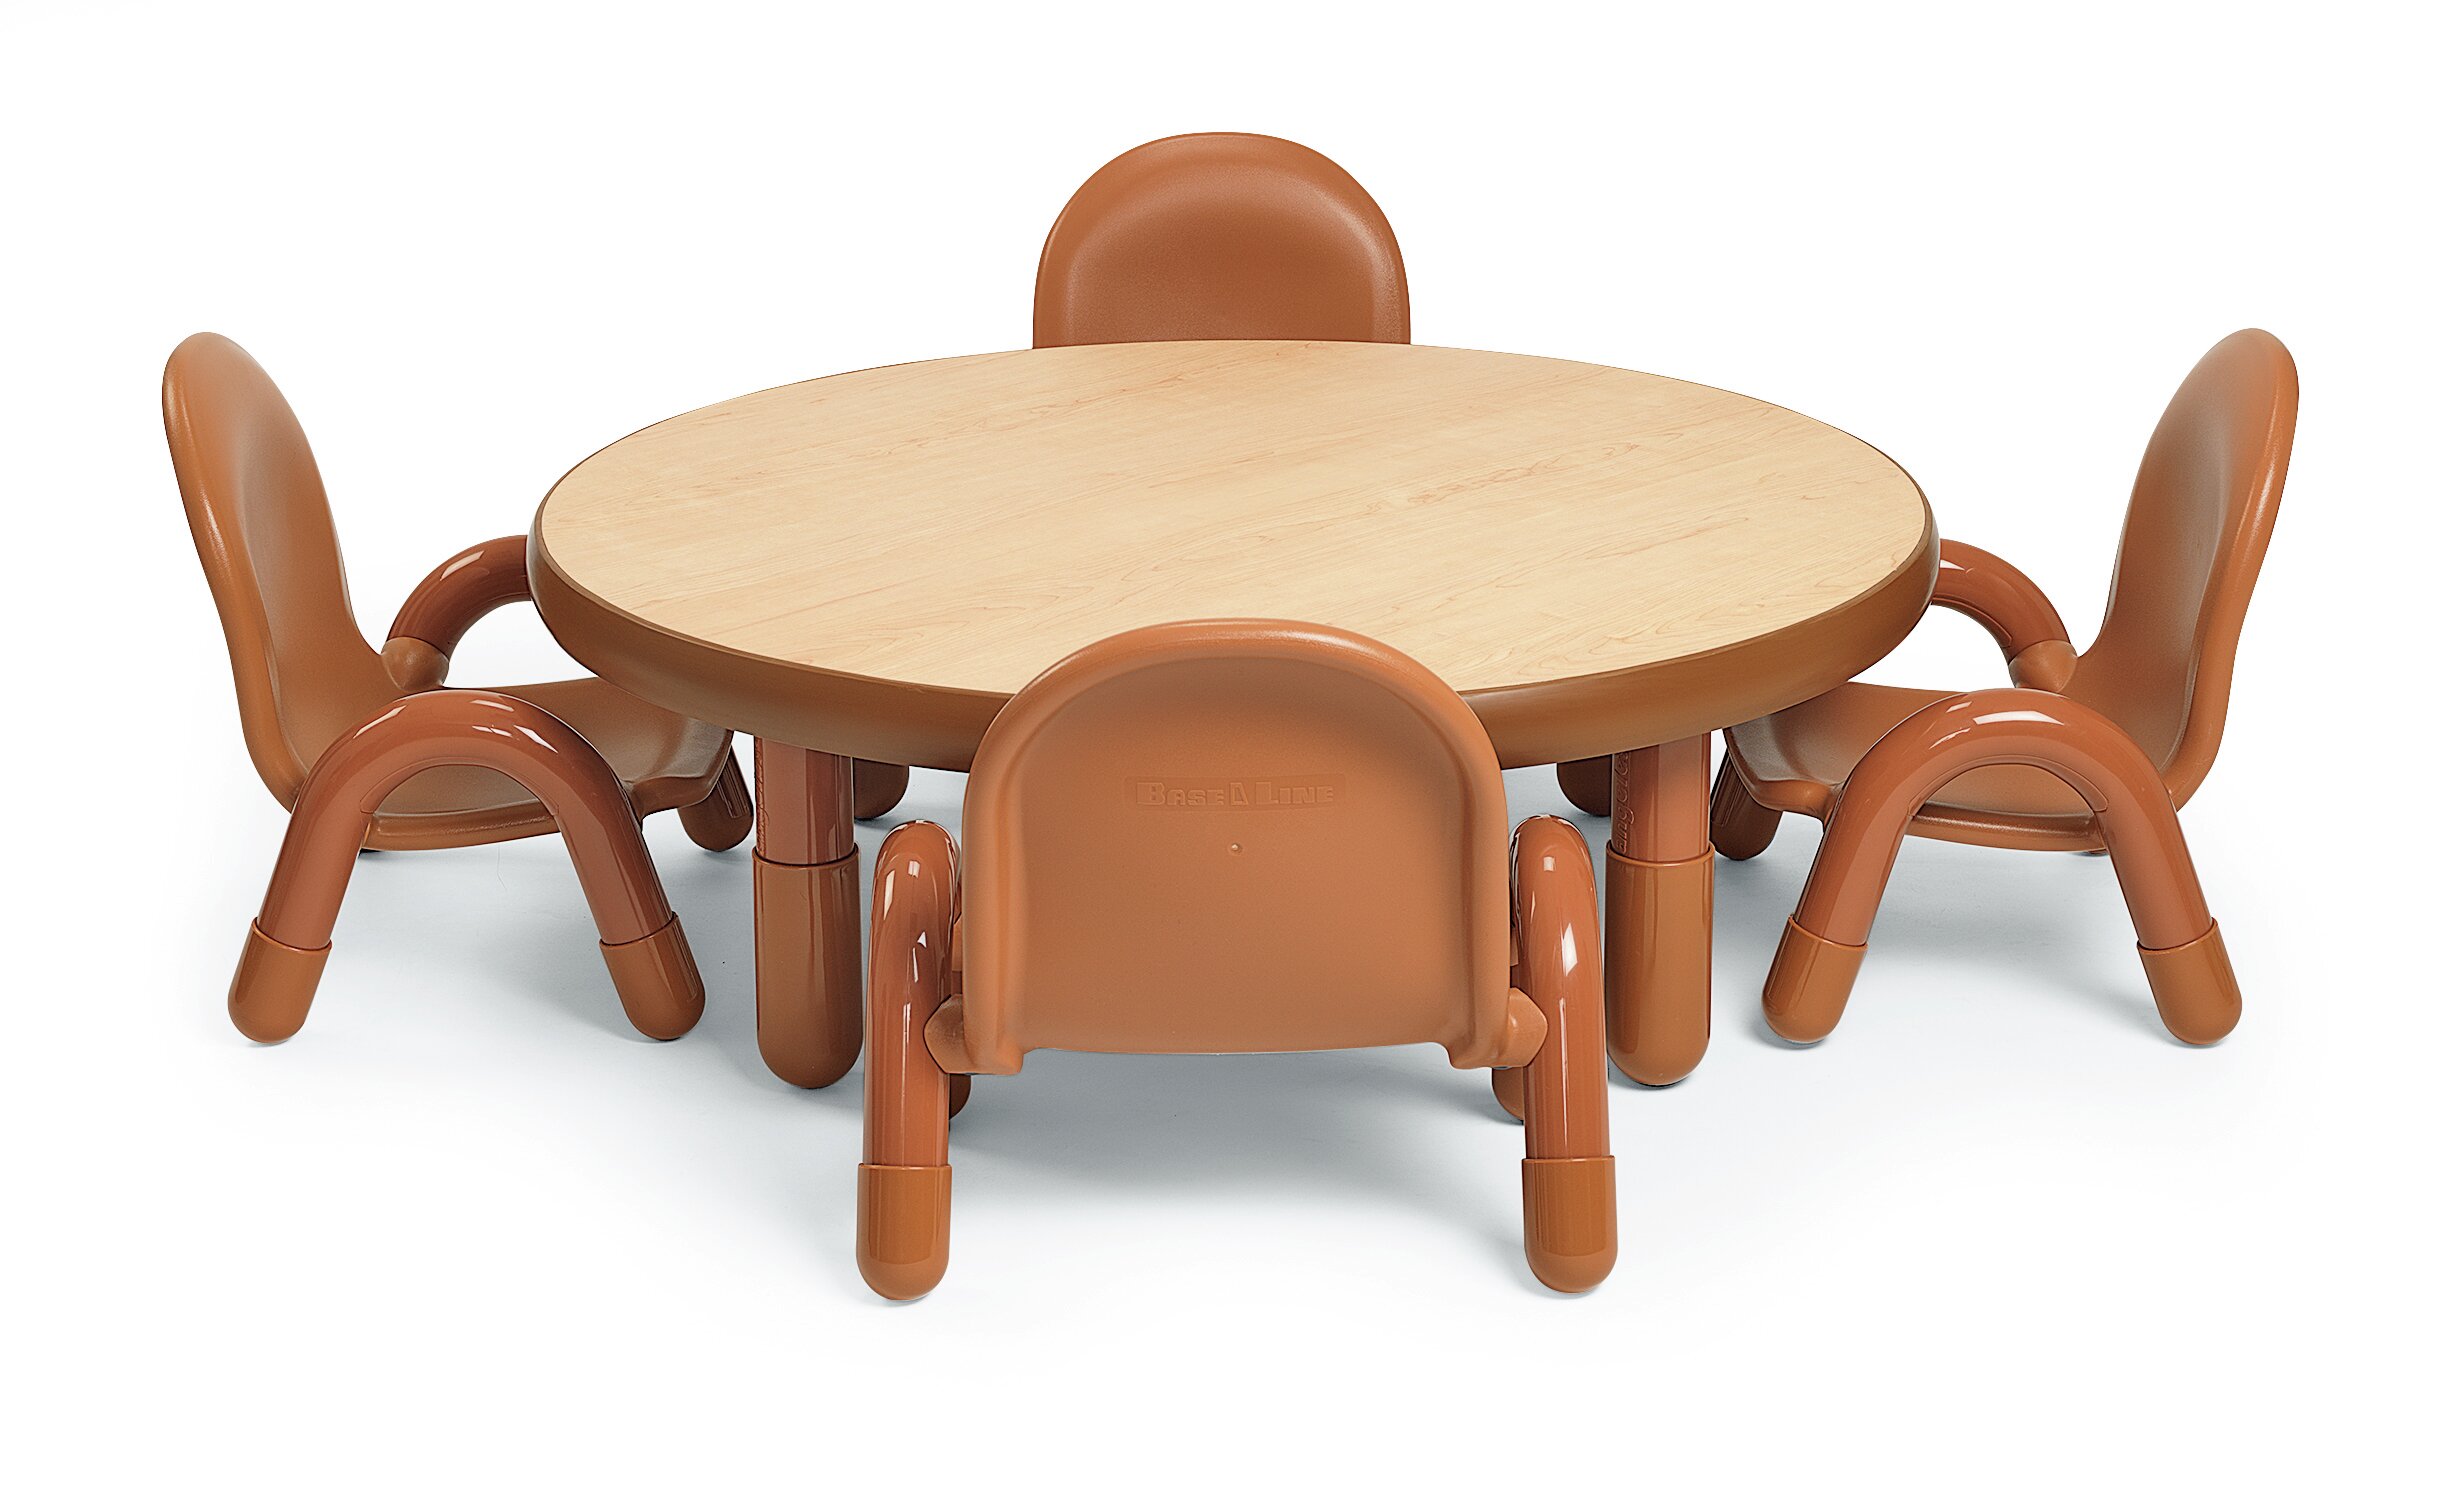 wooden table & chairs for toddlers